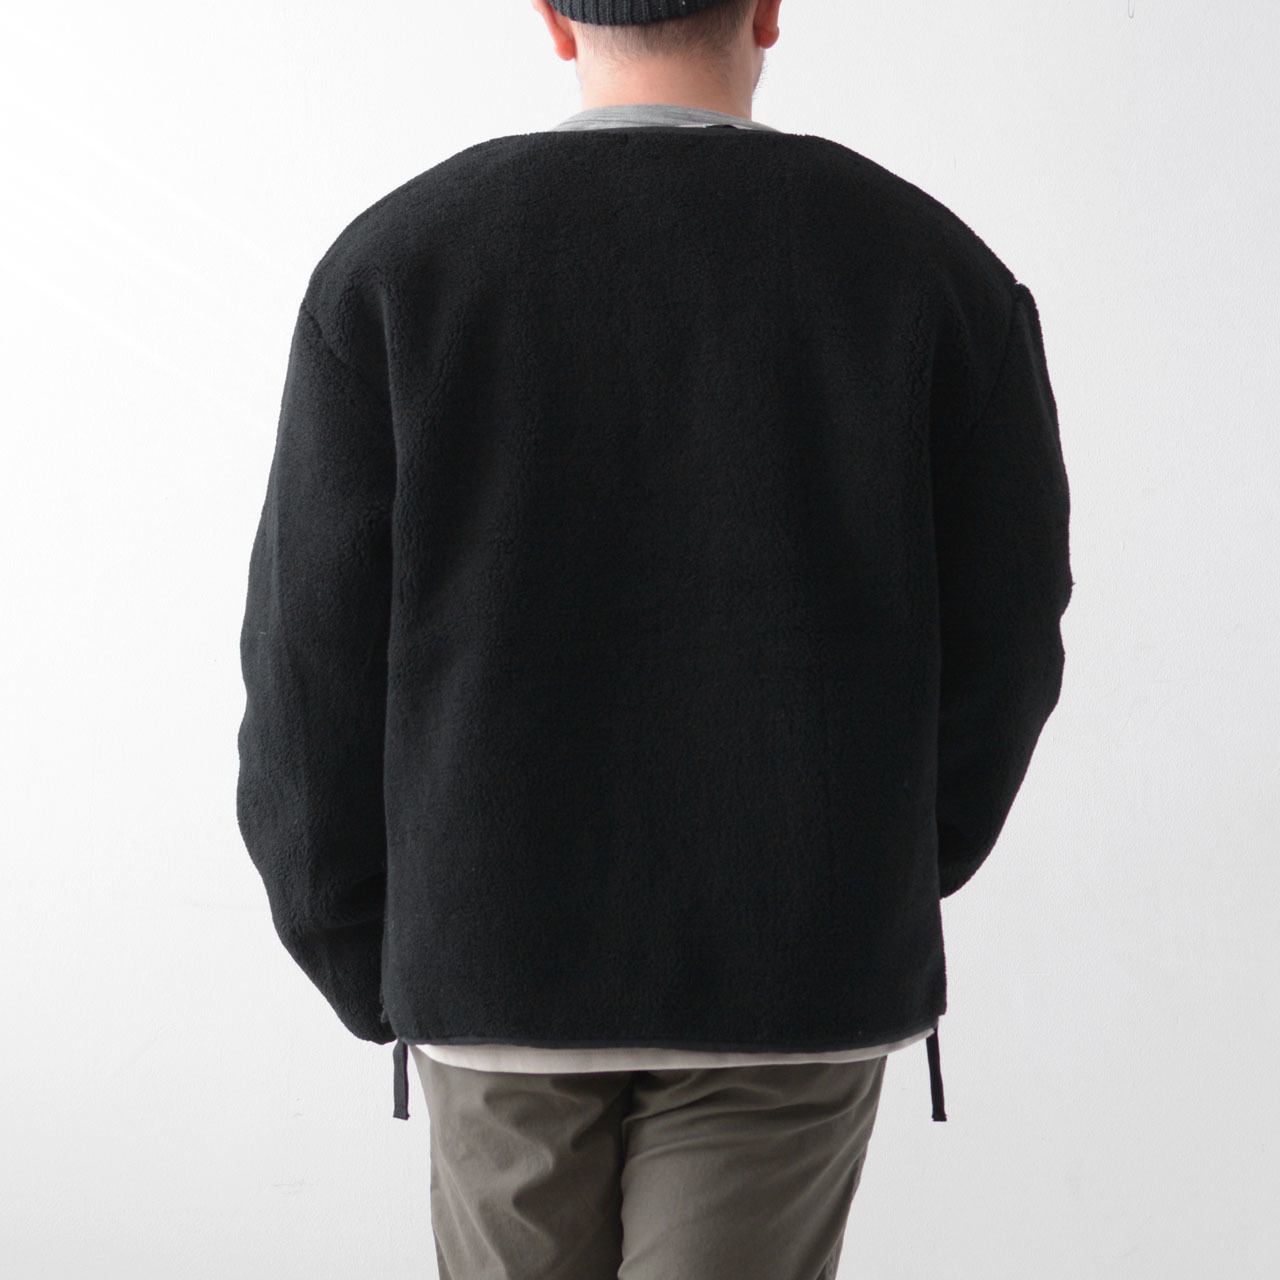 TAION [タイオン] MILITARY RIVERSIBLE CREW NECK DOWN JKT [R104BML-1] _f0051306_15371272.jpg